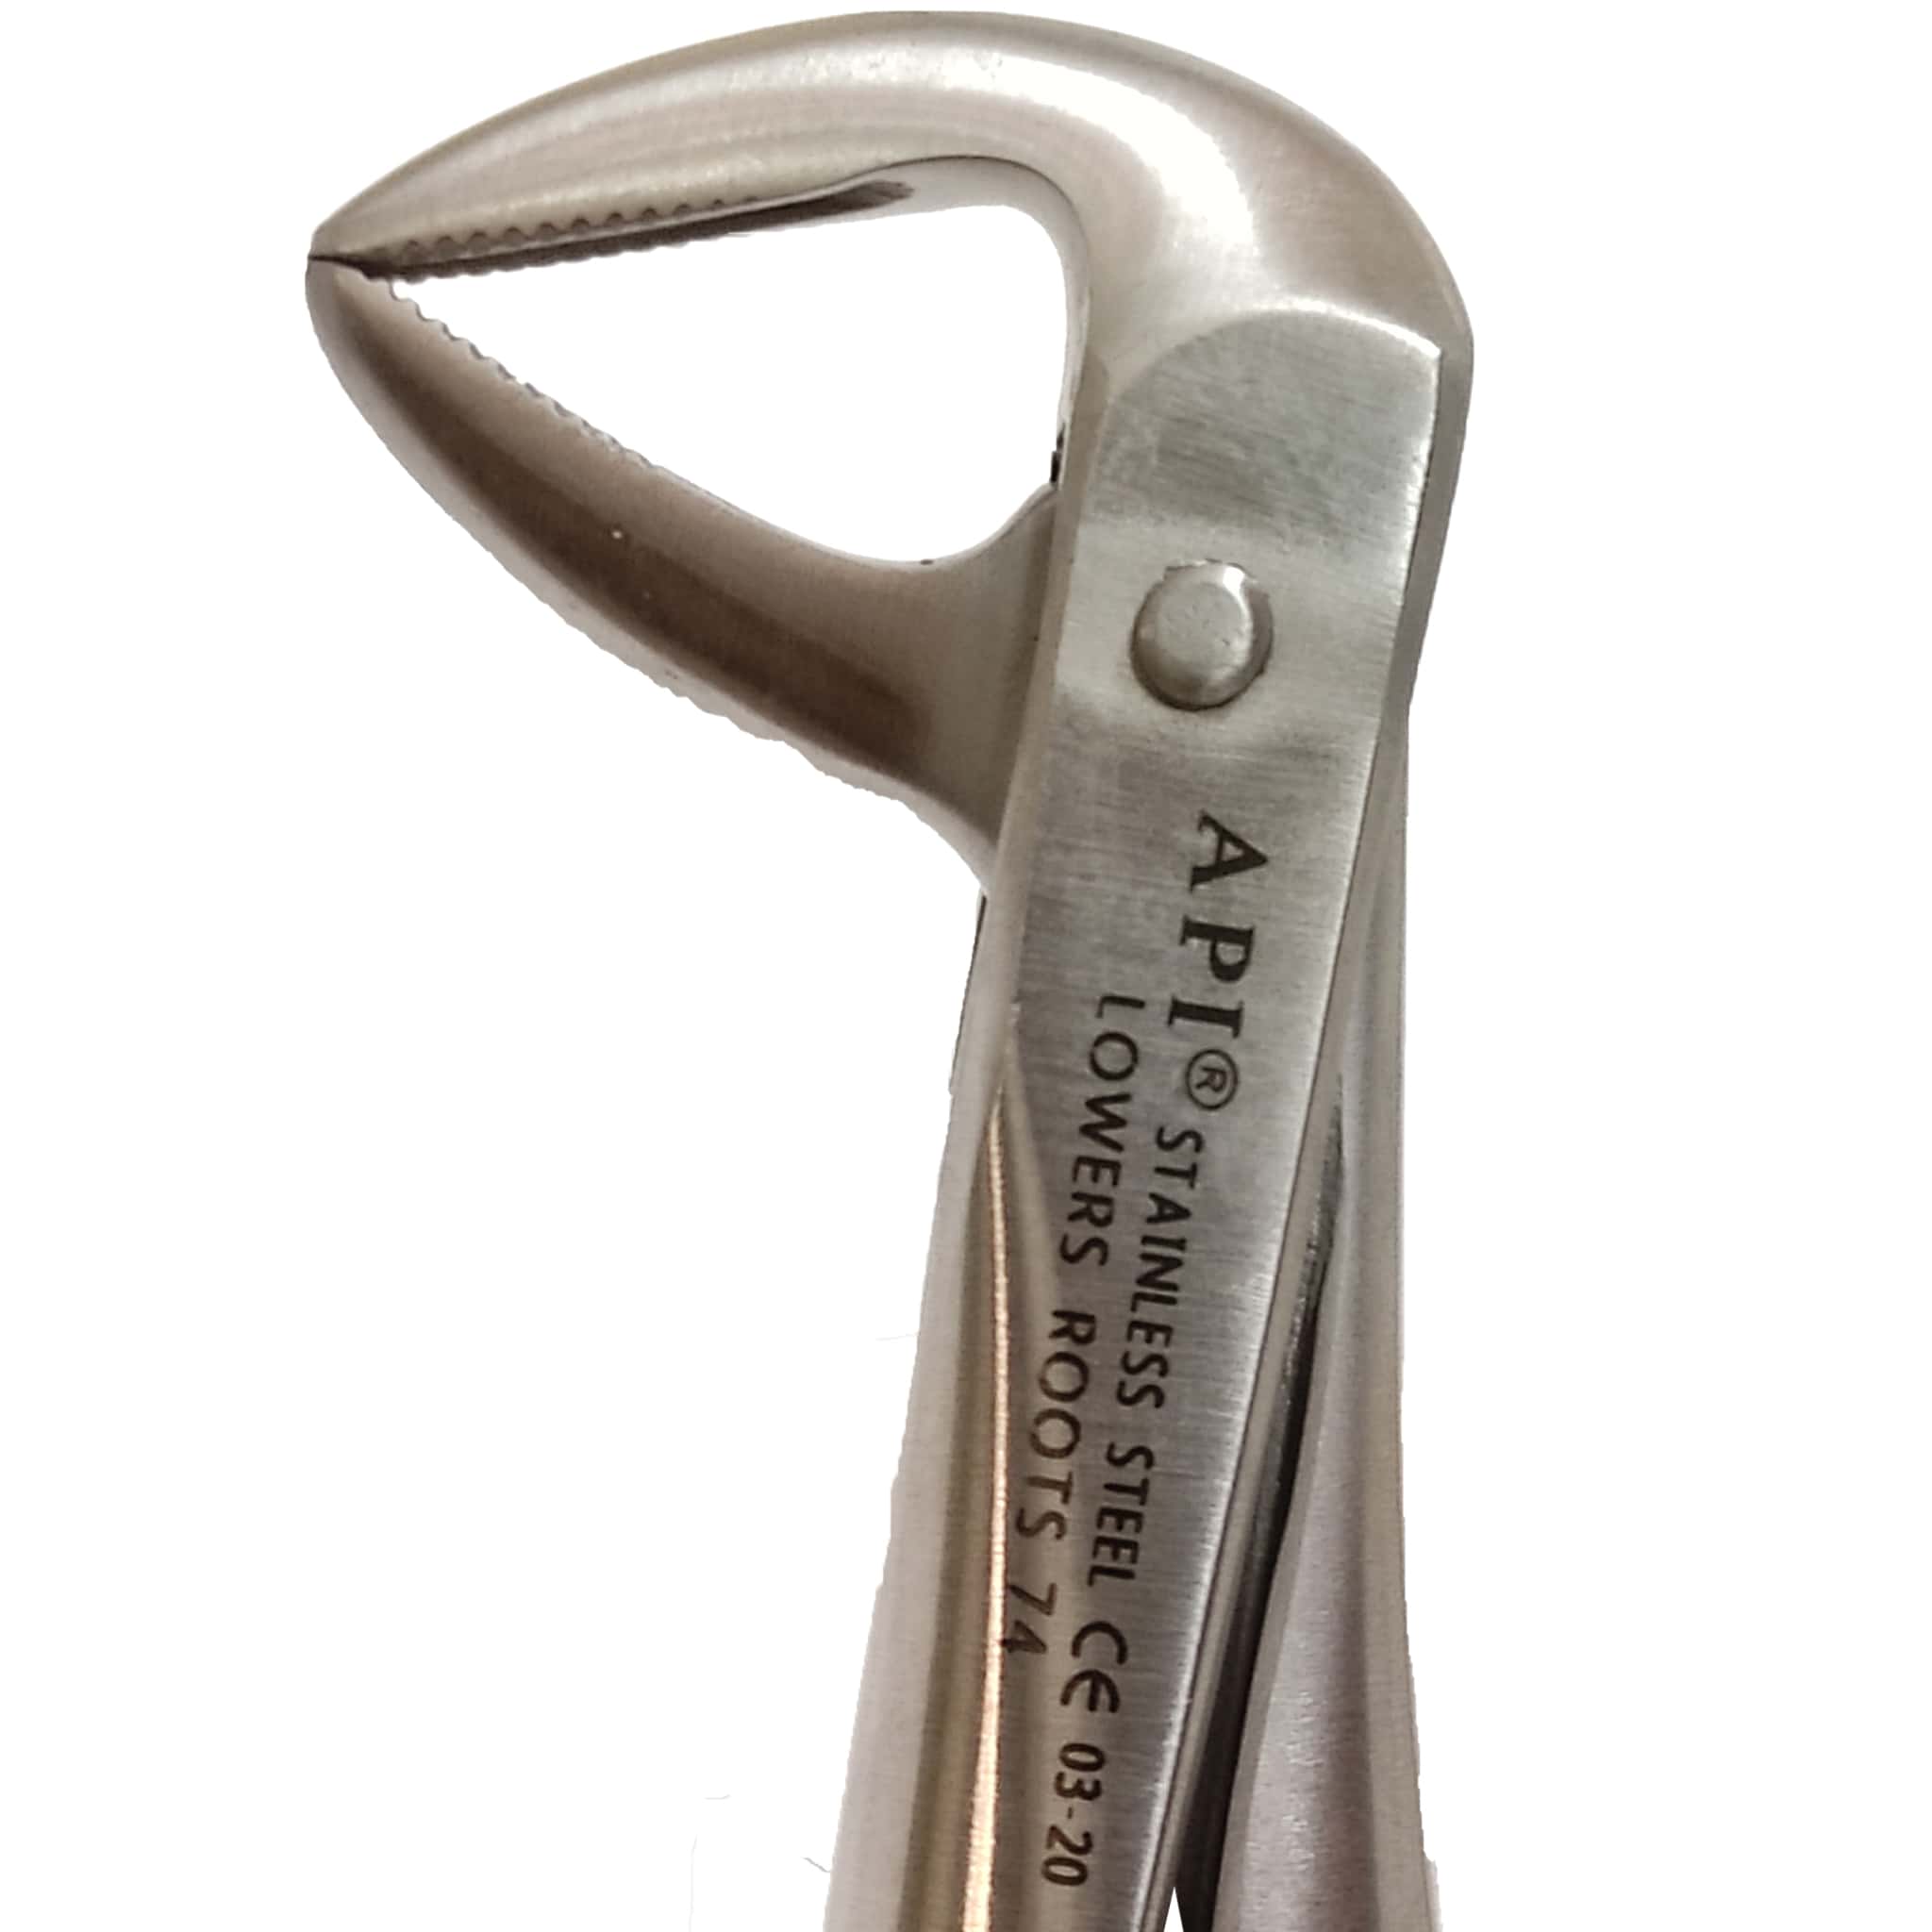 API Extraction Forceps Root